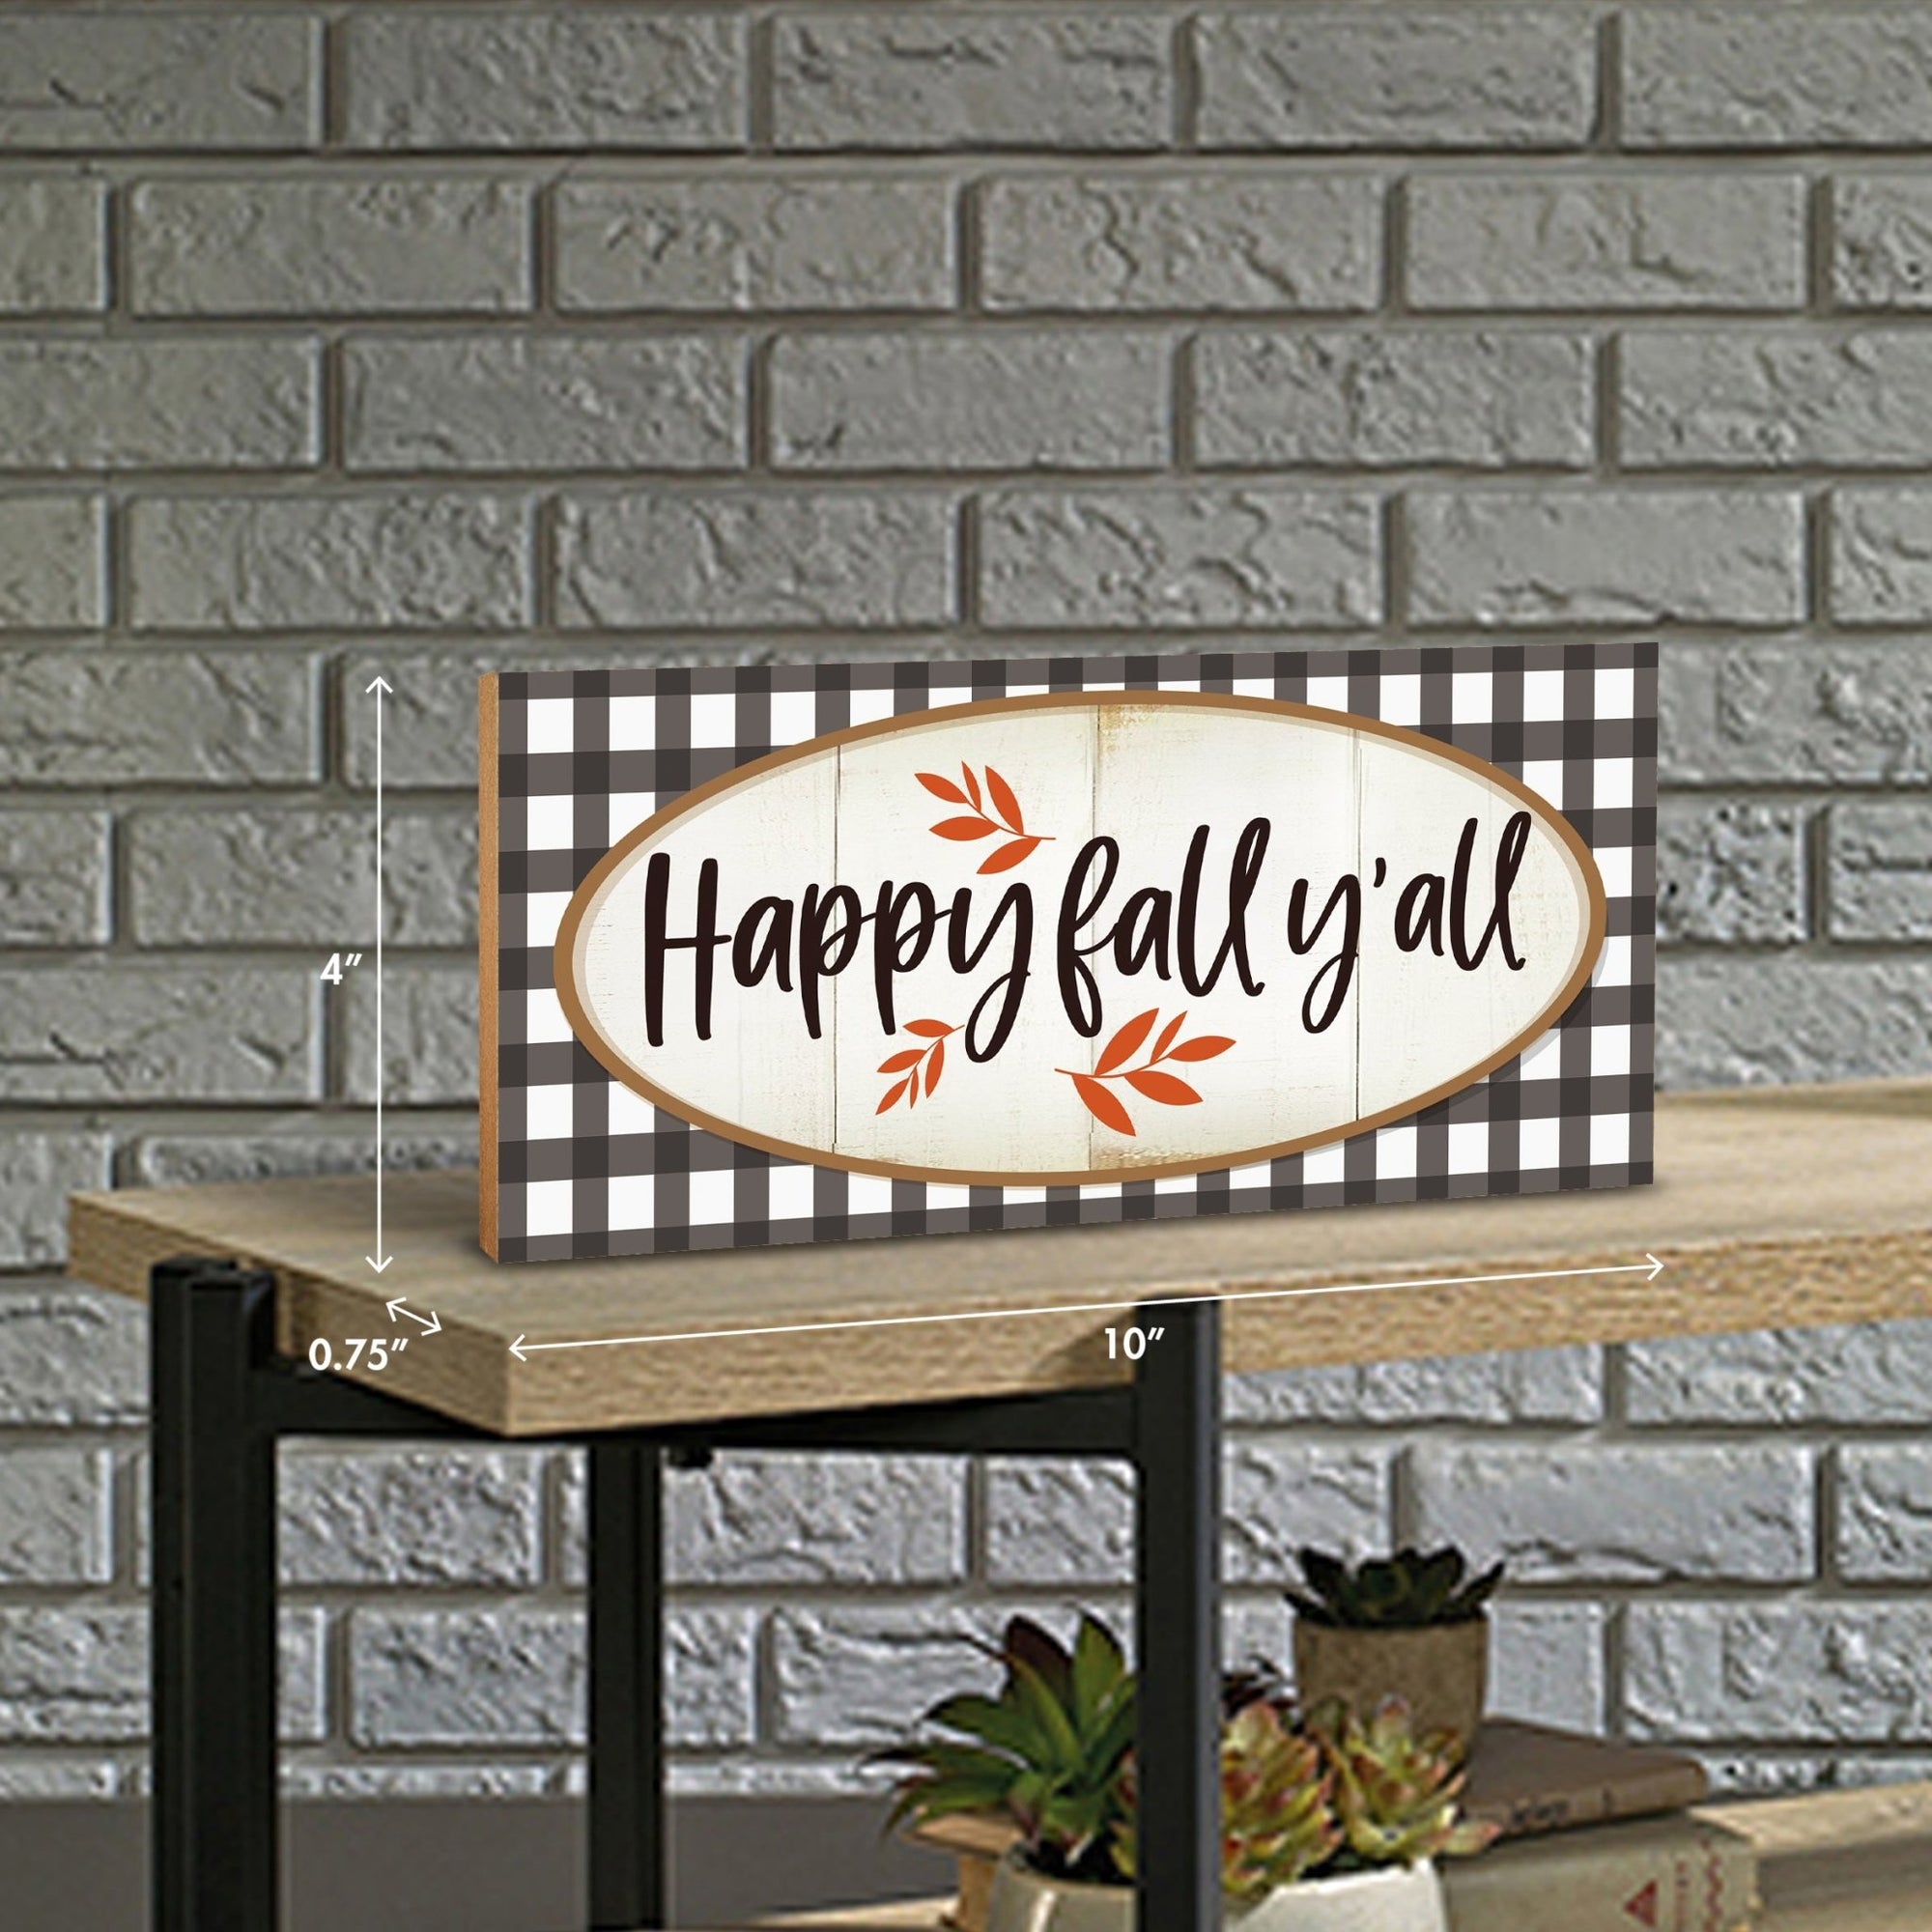 Fall Themed Unique Shelf Décor and Tabletop Signs for Home Decor - Happy Fall Y’all - LifeSong Milestones